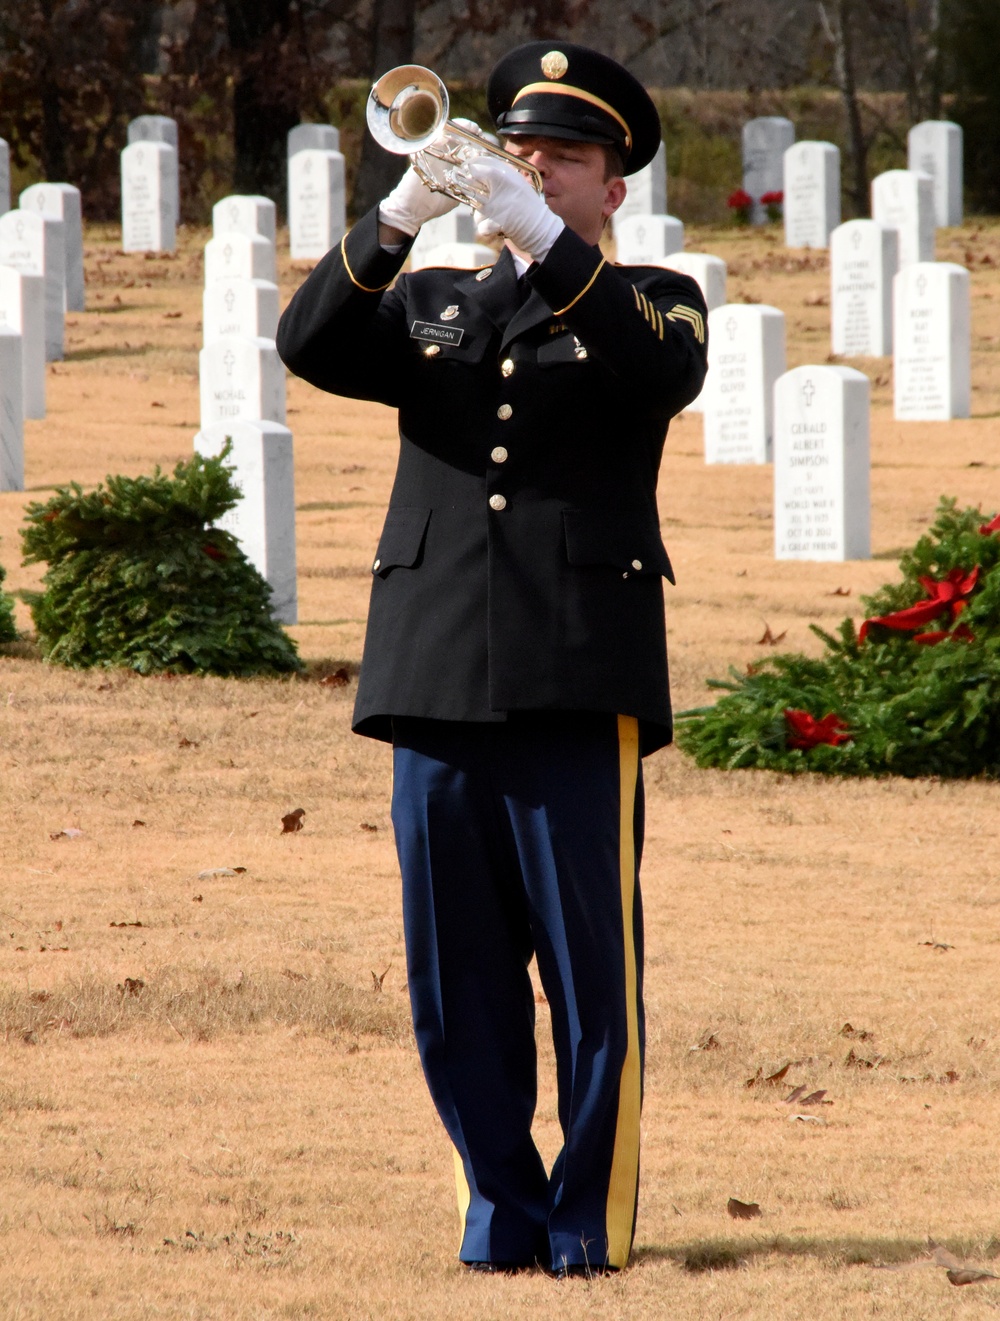 Bugler Plays Taps at Ceremony